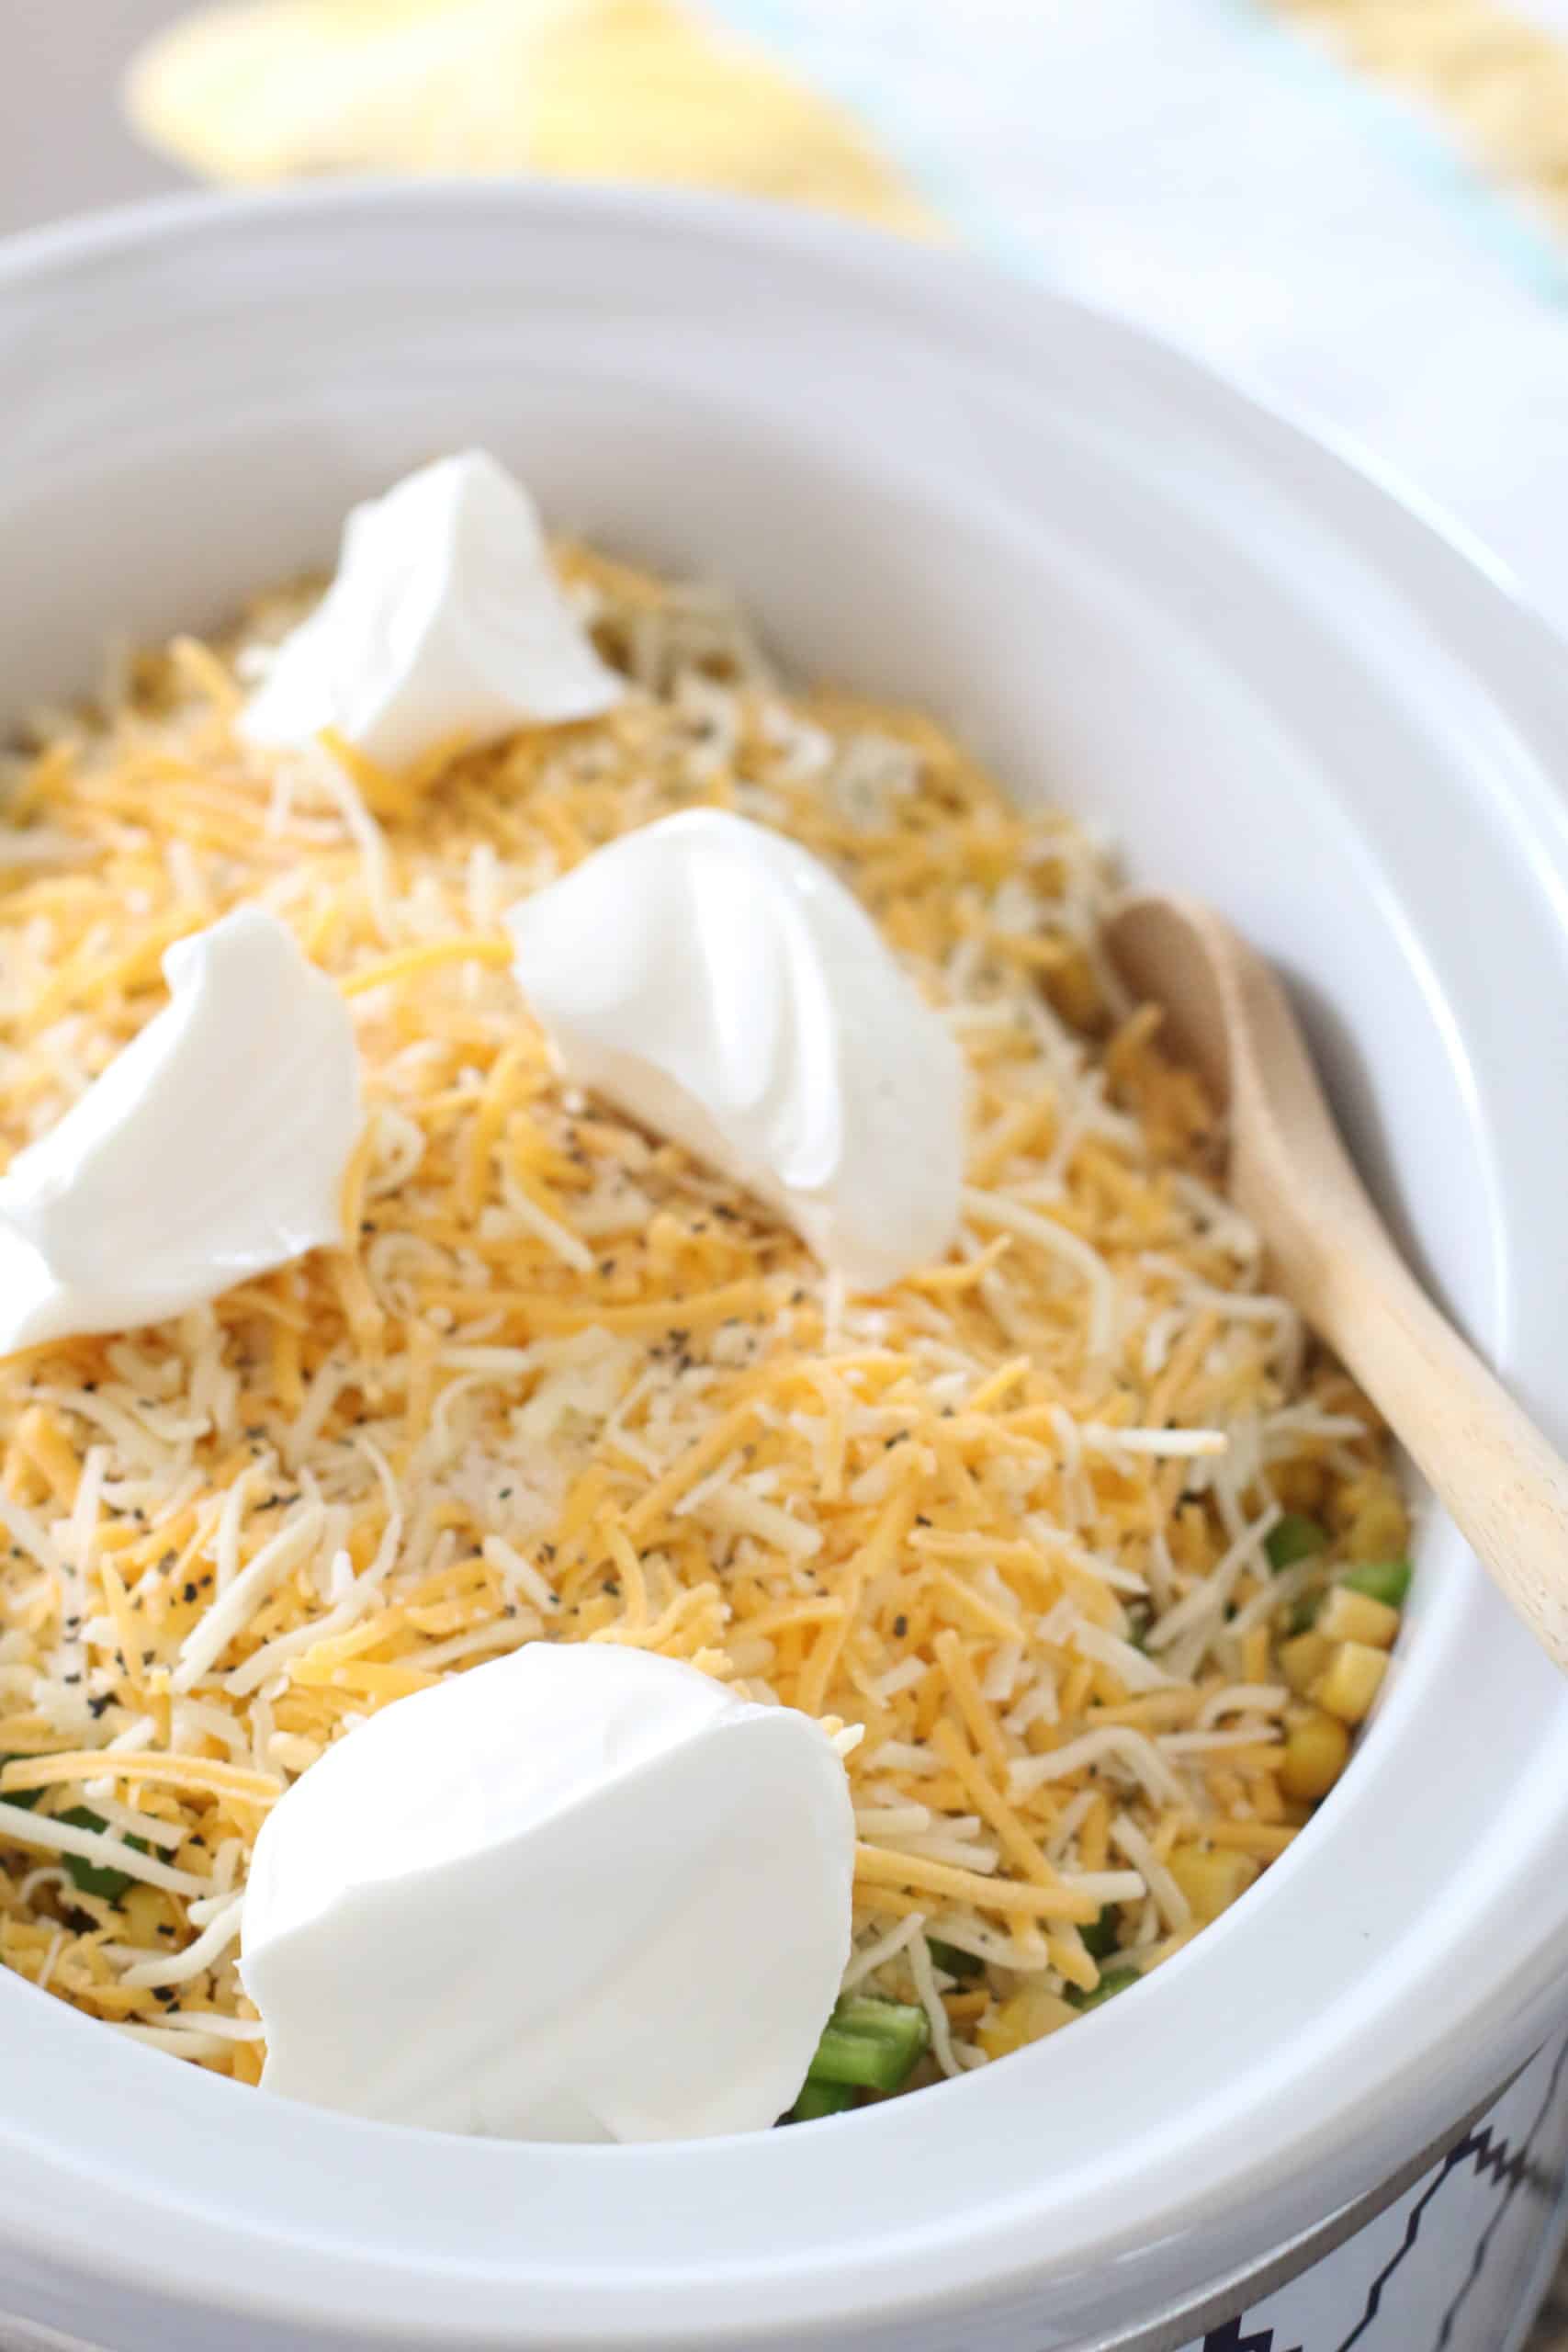 four large dollops of sour cream on top of shredded cheese in slow cooker with wooden spoon on the side.